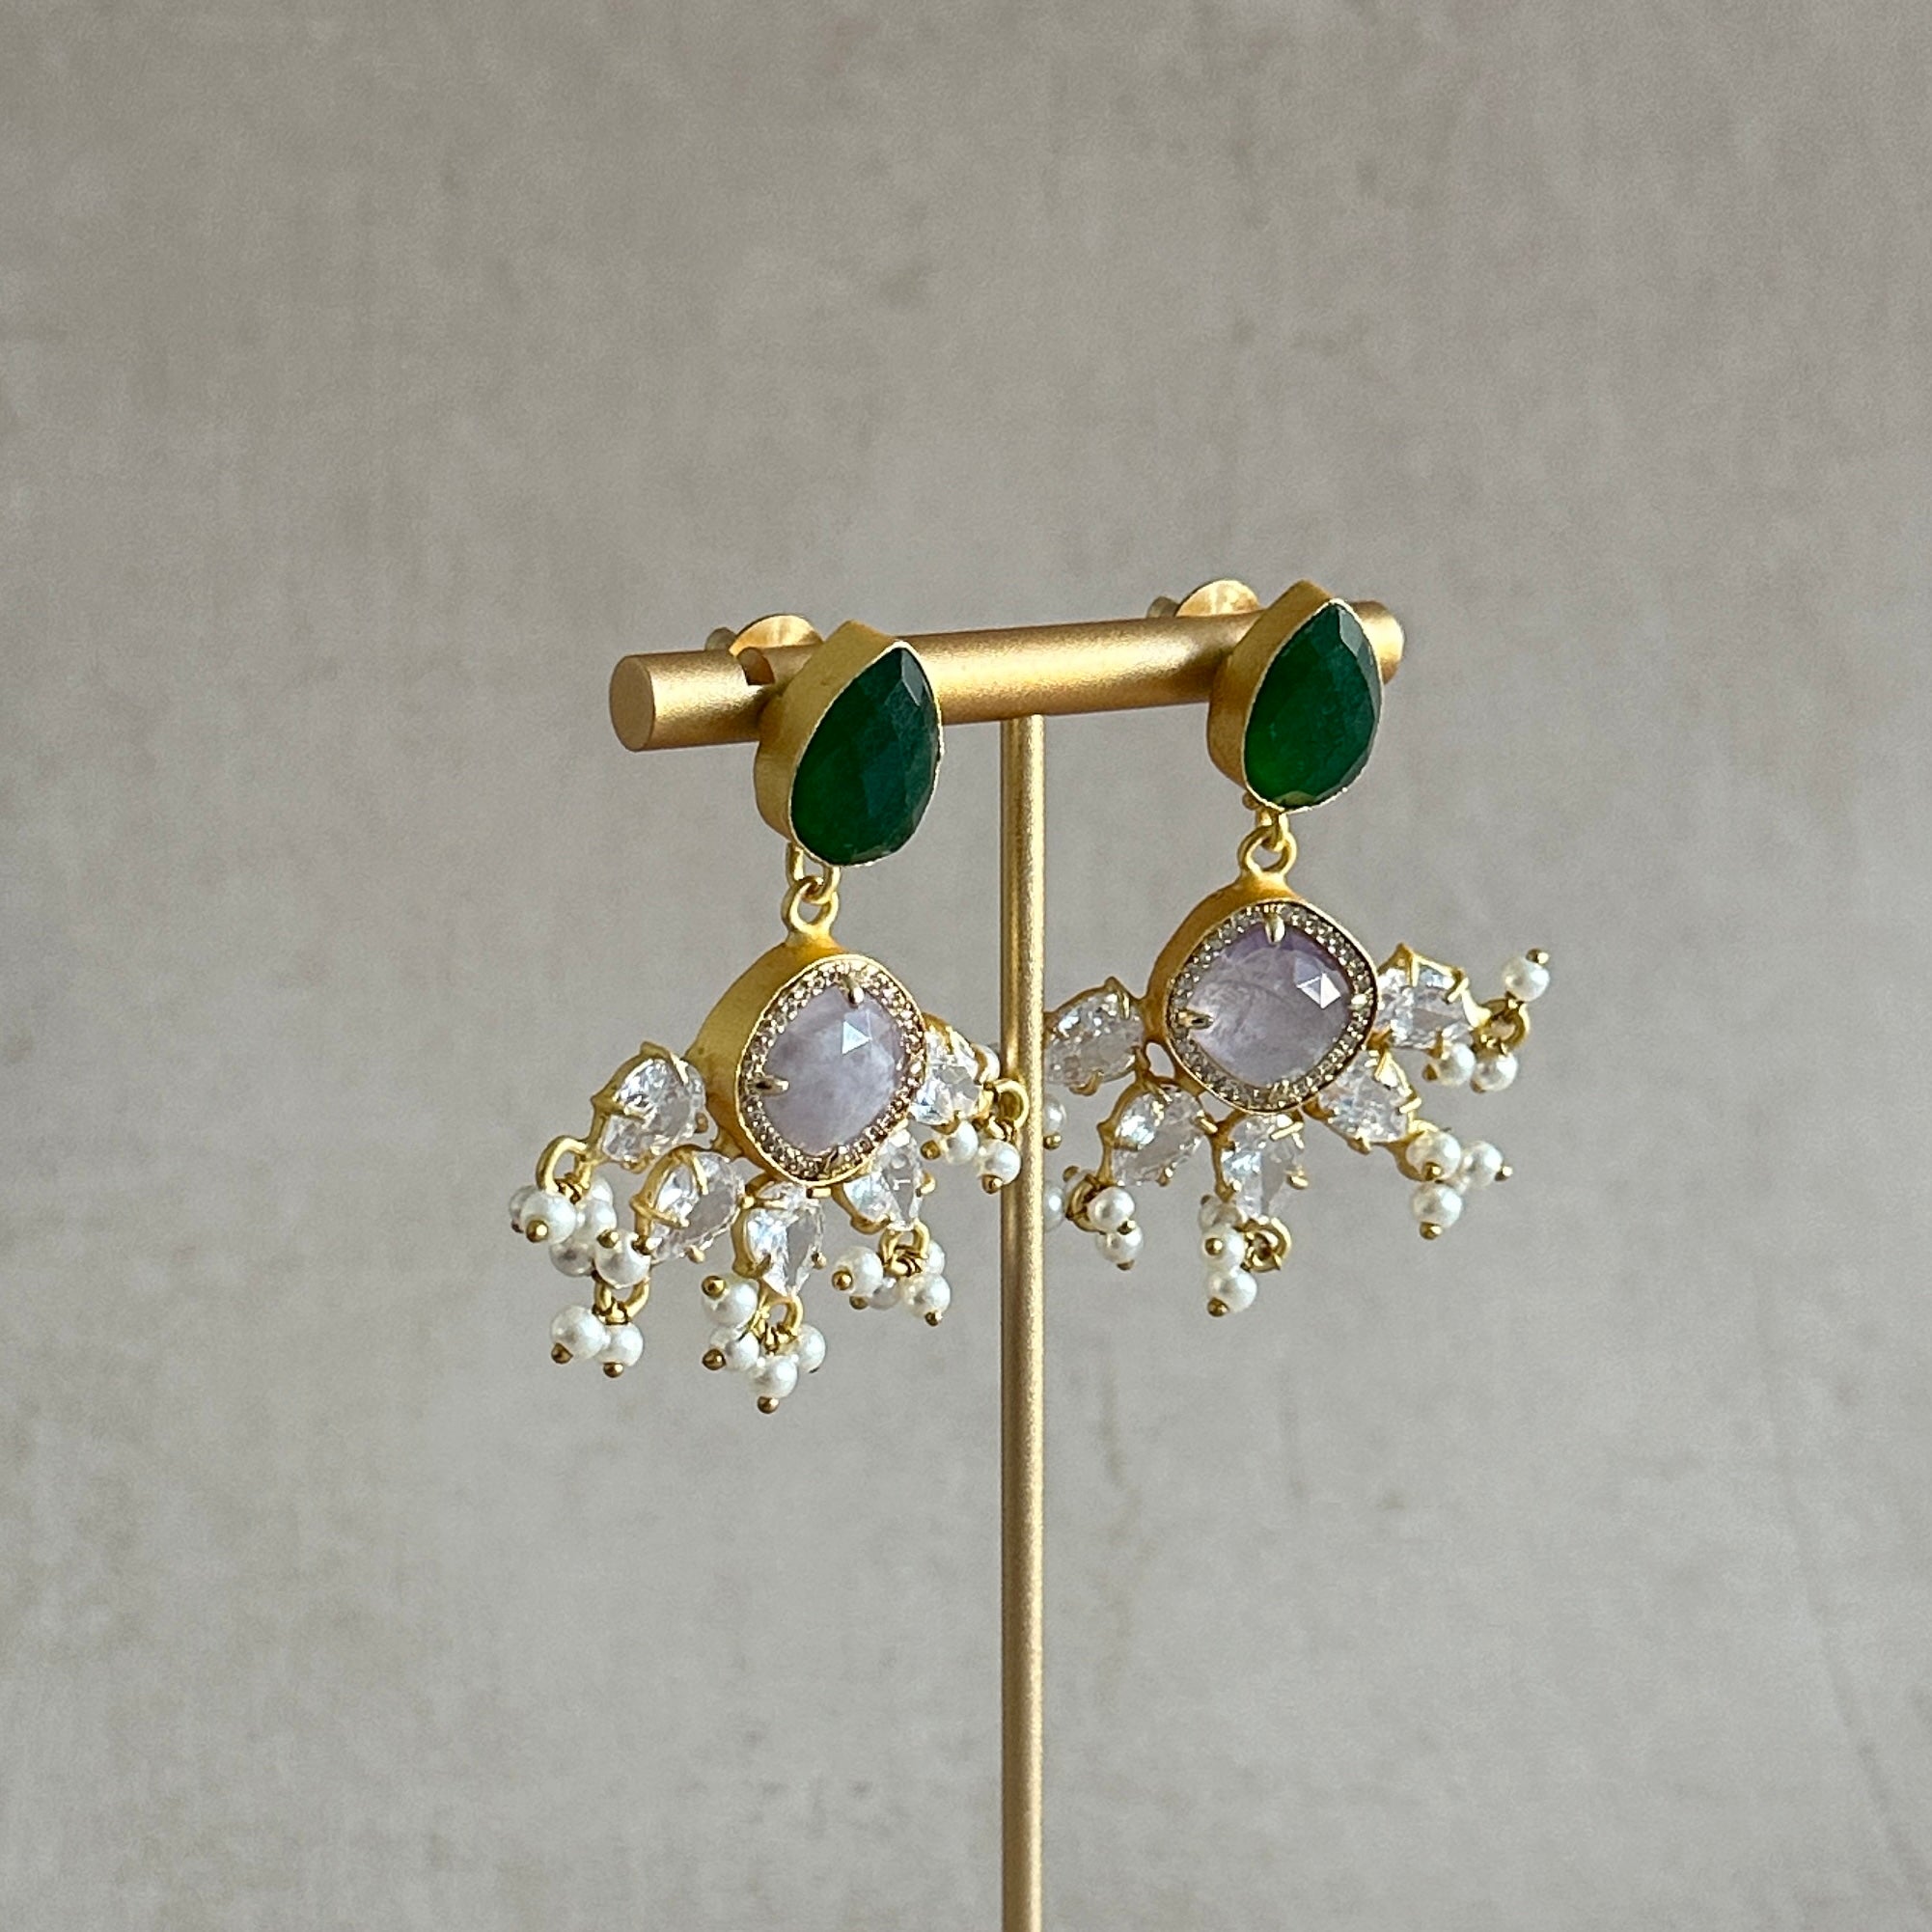 These Harper Green Drop Earrings feature a stunning mix of green and lilac hues, creating a striking and versatile accessory. Adorned with cz crystals, these earrings add an elegant sparkle to any outfit. Elevate your style with these must-have earrings!